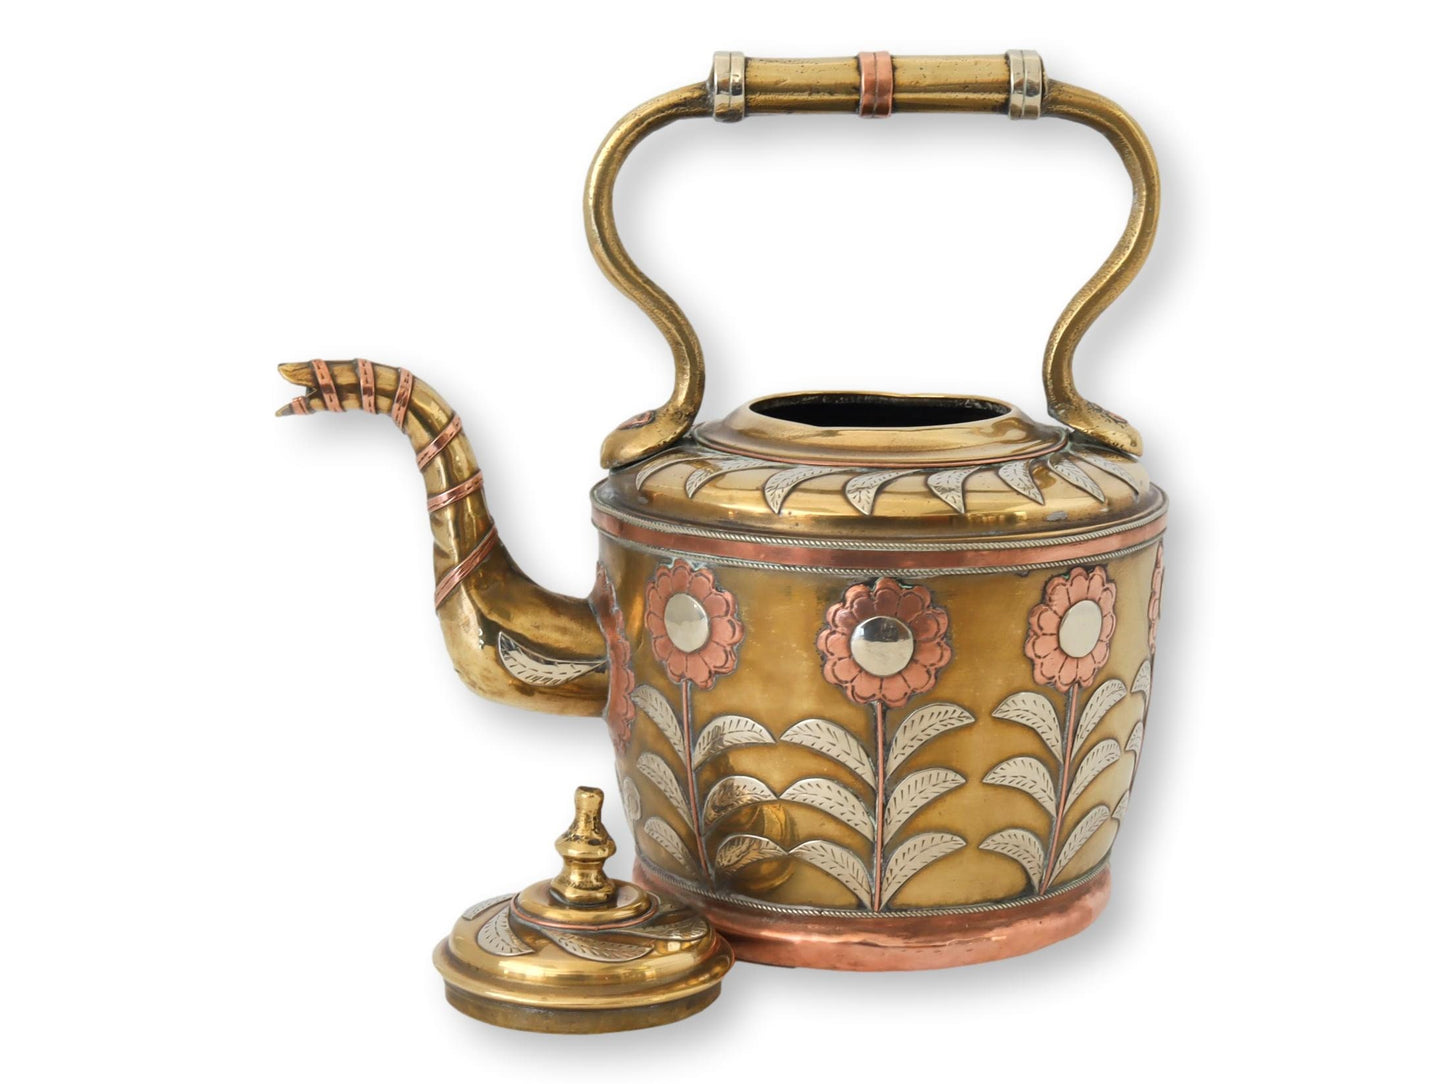 Mixed Metal Arts & Crafts Water Kettle